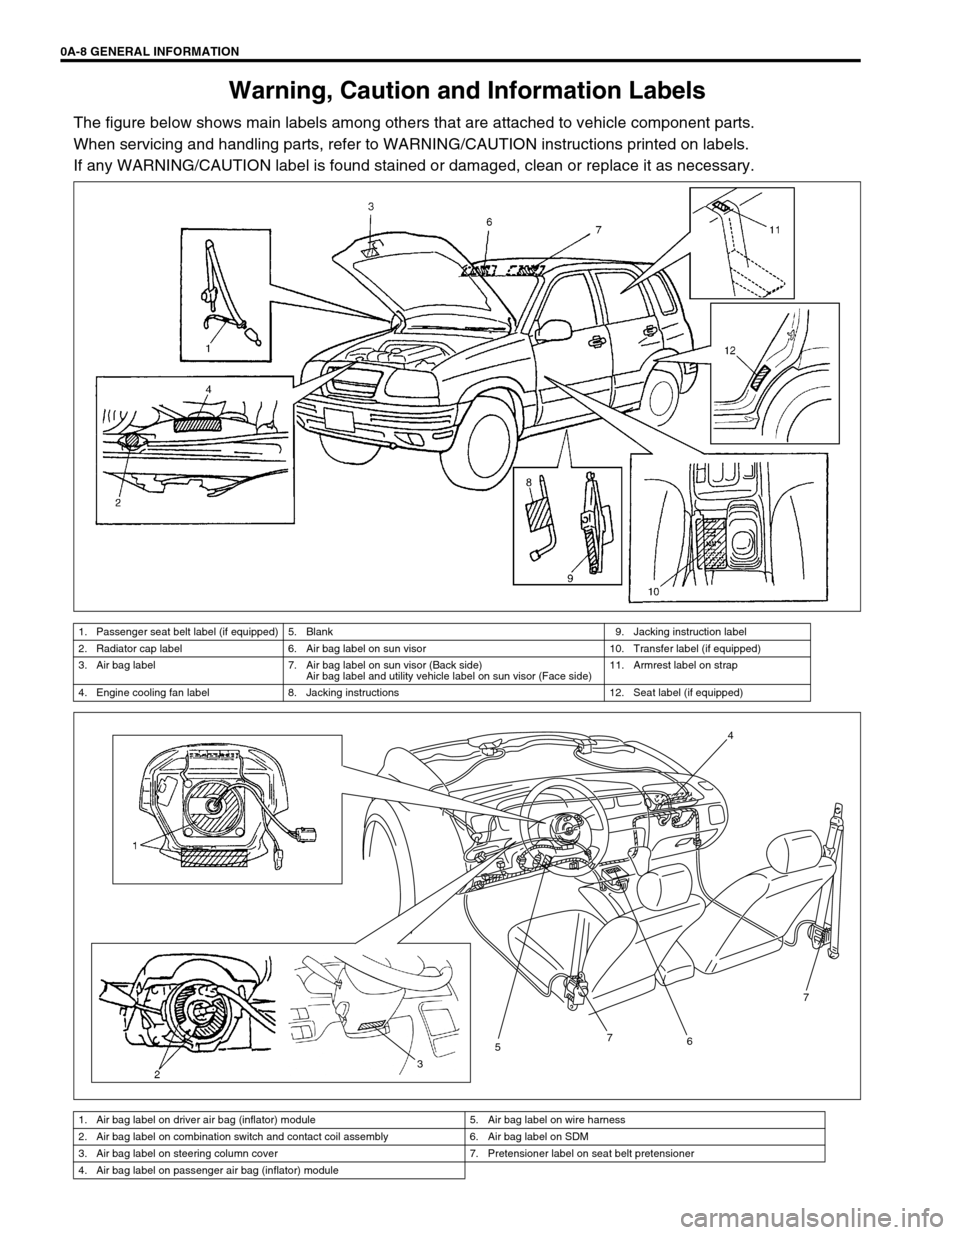 SUZUKI GRAND VITARA 1999 2.G User Guide 0A-8 GENERAL INFORMATION
Warning, Caution and Information Labels
The figure below shows main labels among others that are attached to vehicle component parts.
When servicing and handling parts, refer 